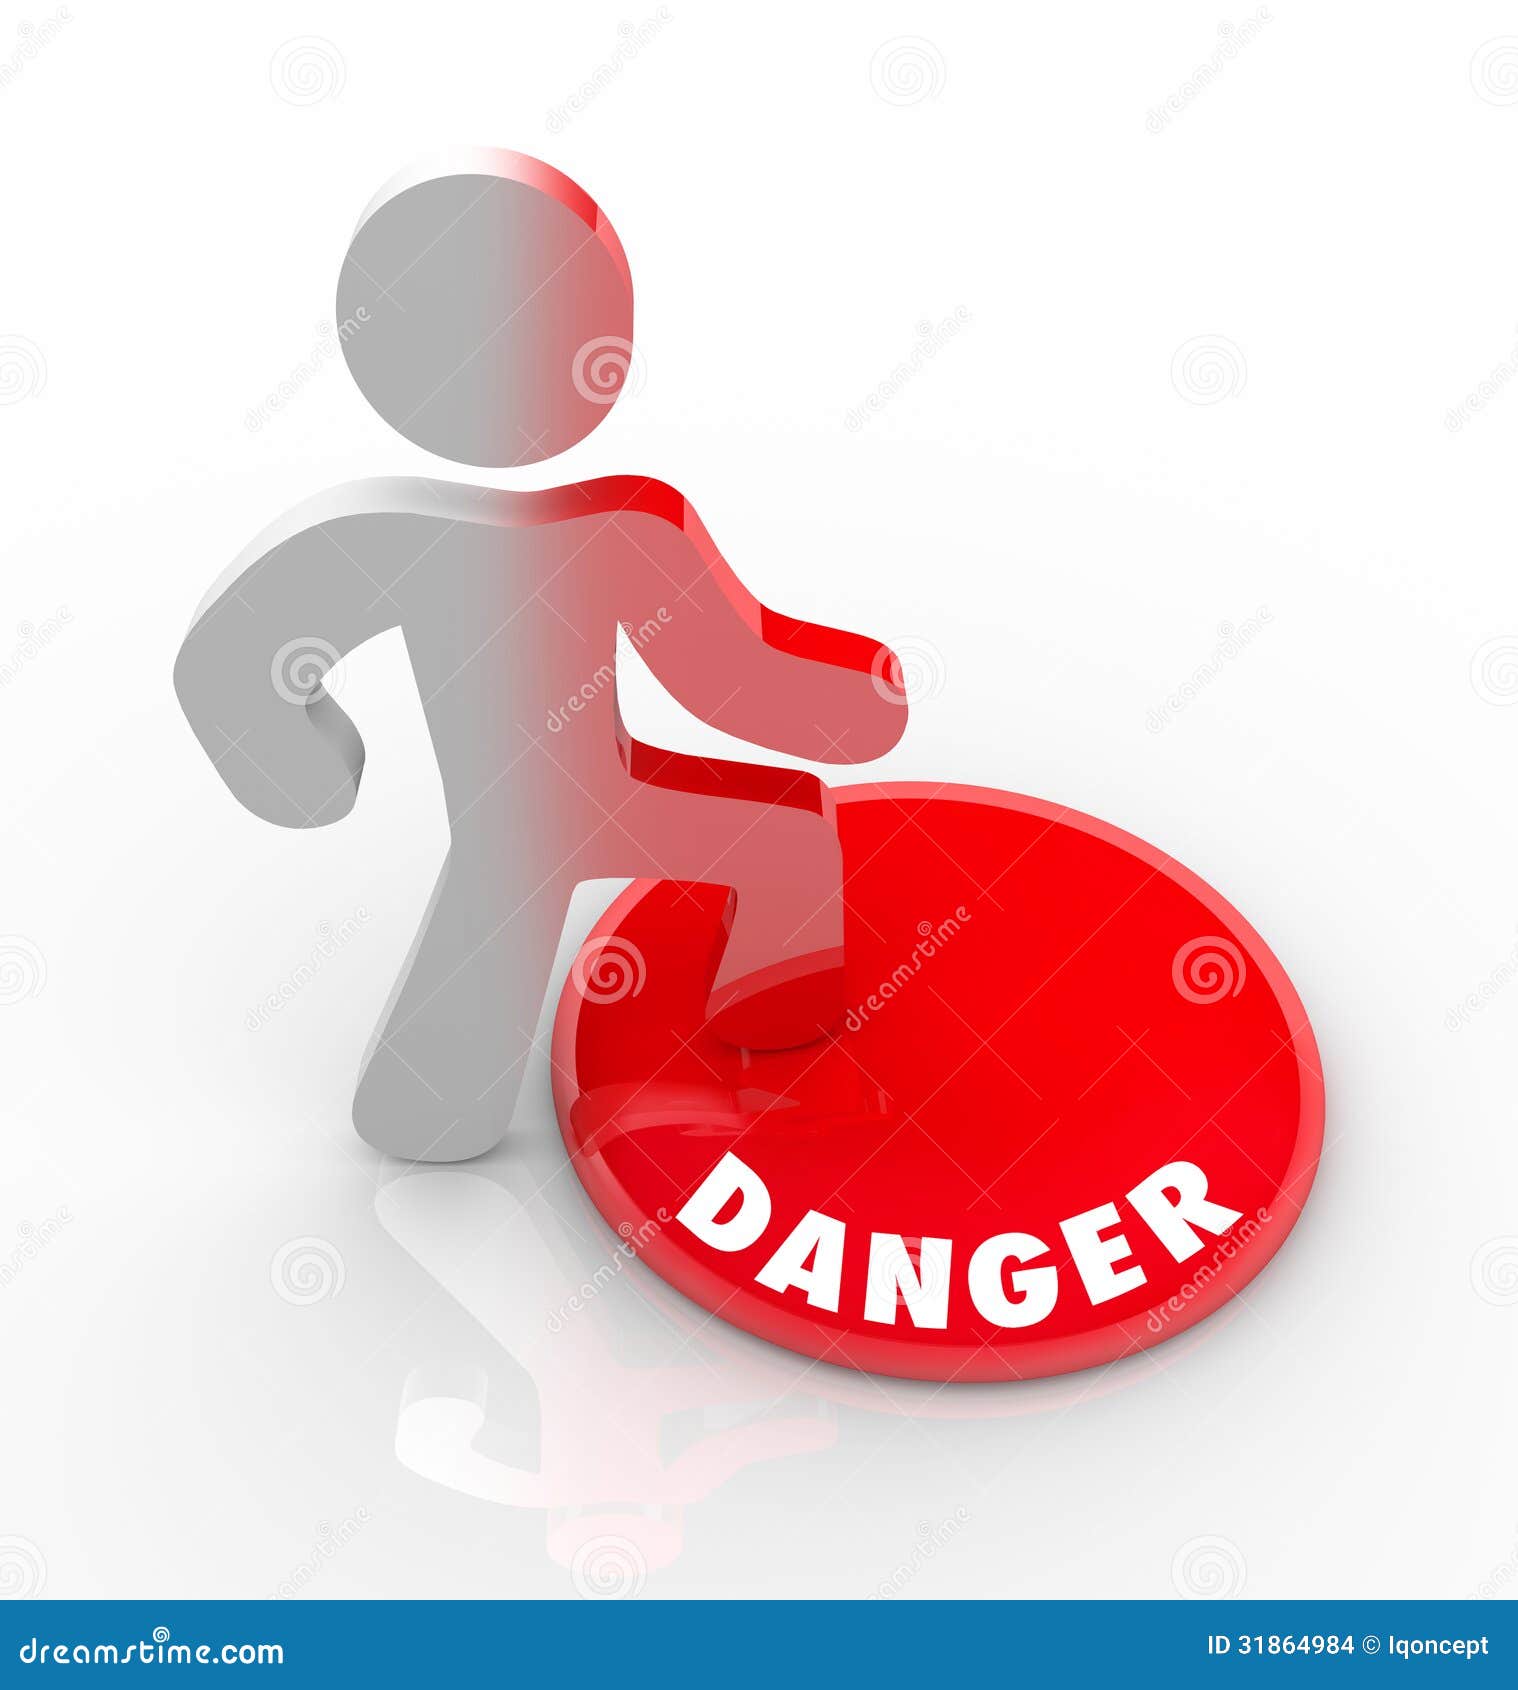 danger red button person warned of threats and hazards